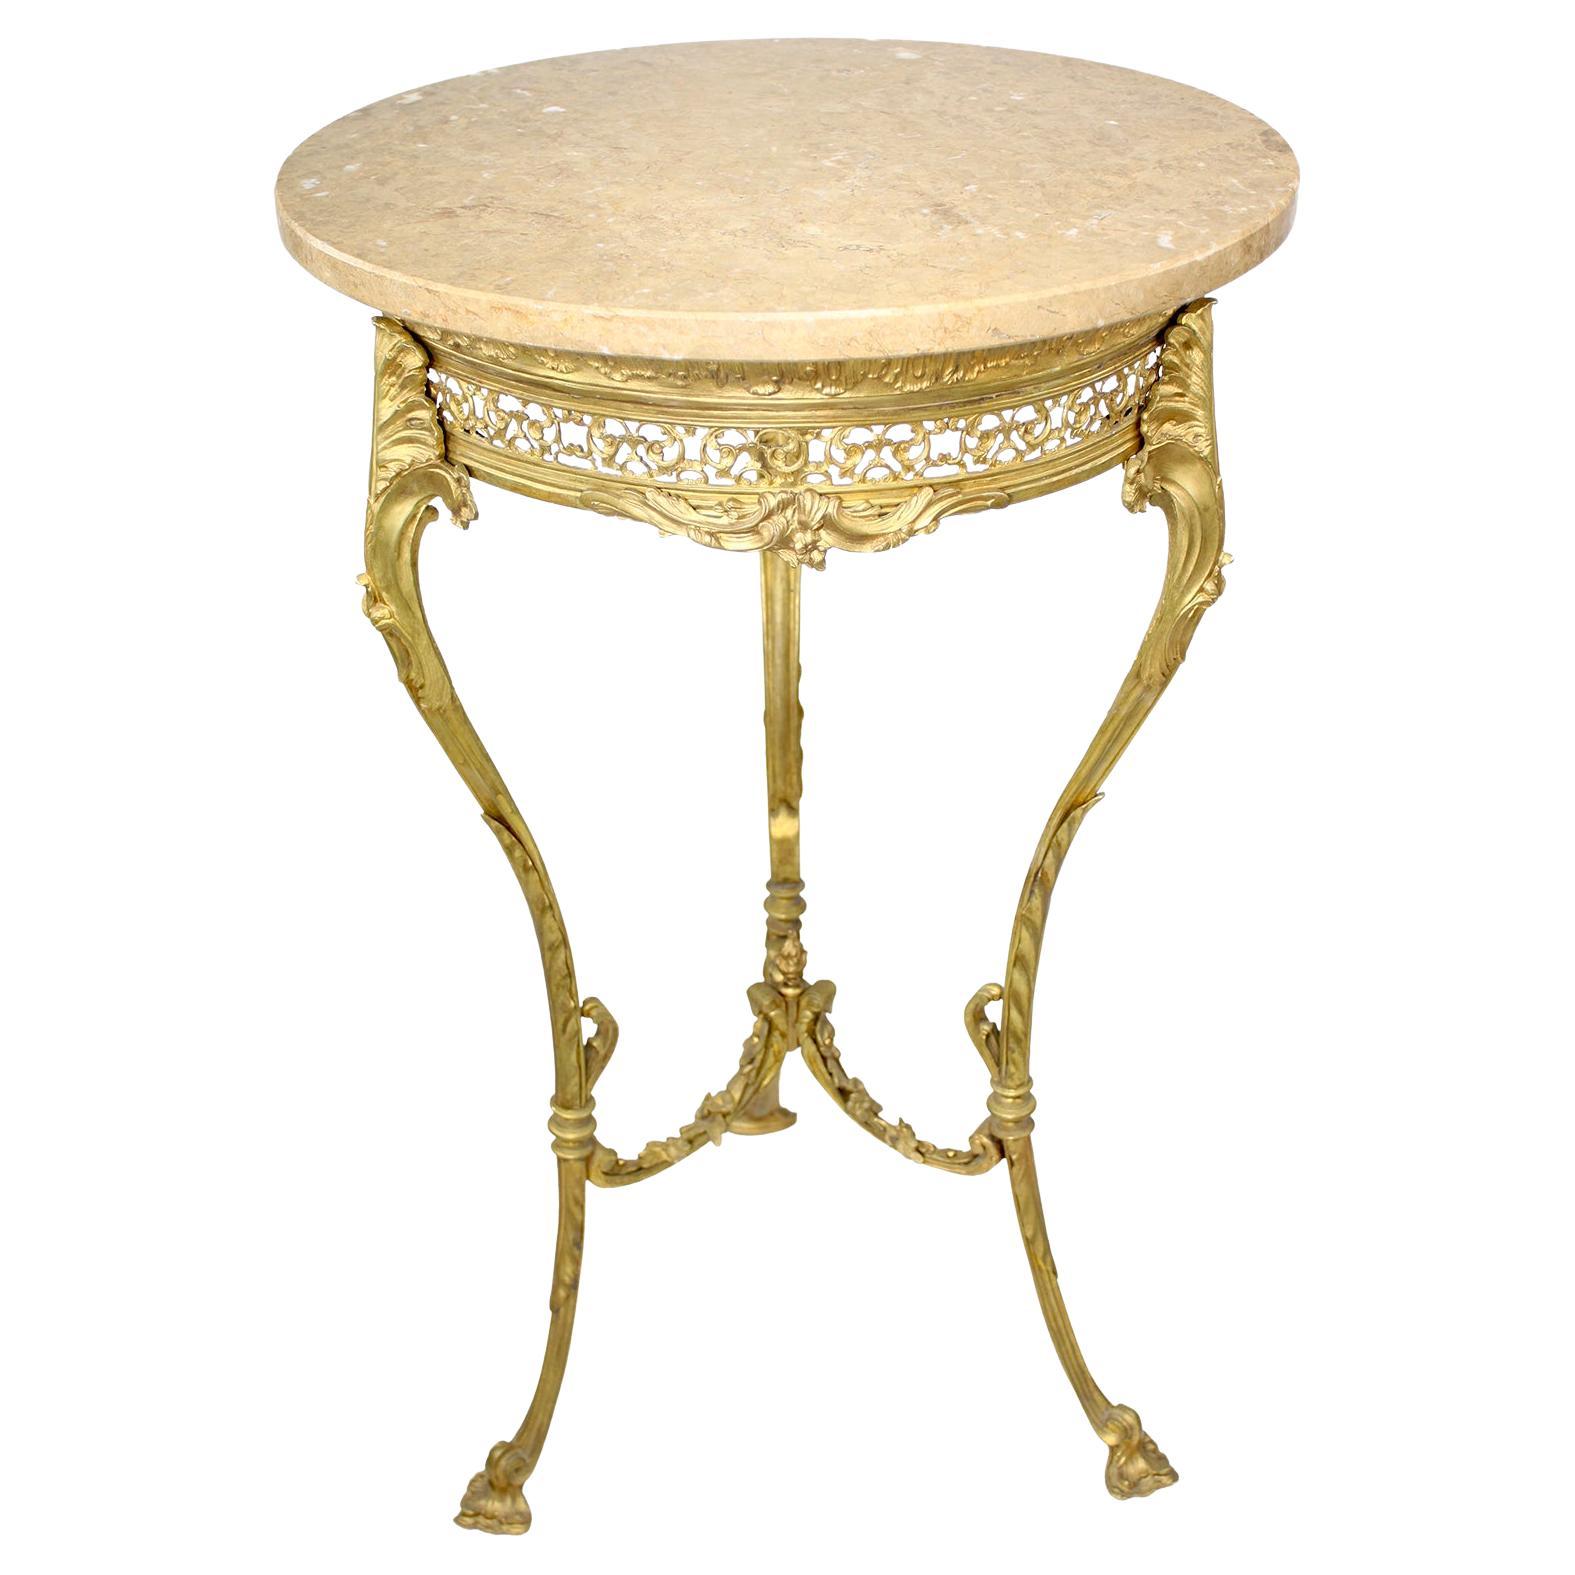 A French Belle Époque Louis XV Style Gilt-Bronze Gueridon Table with Marble Top For Sale